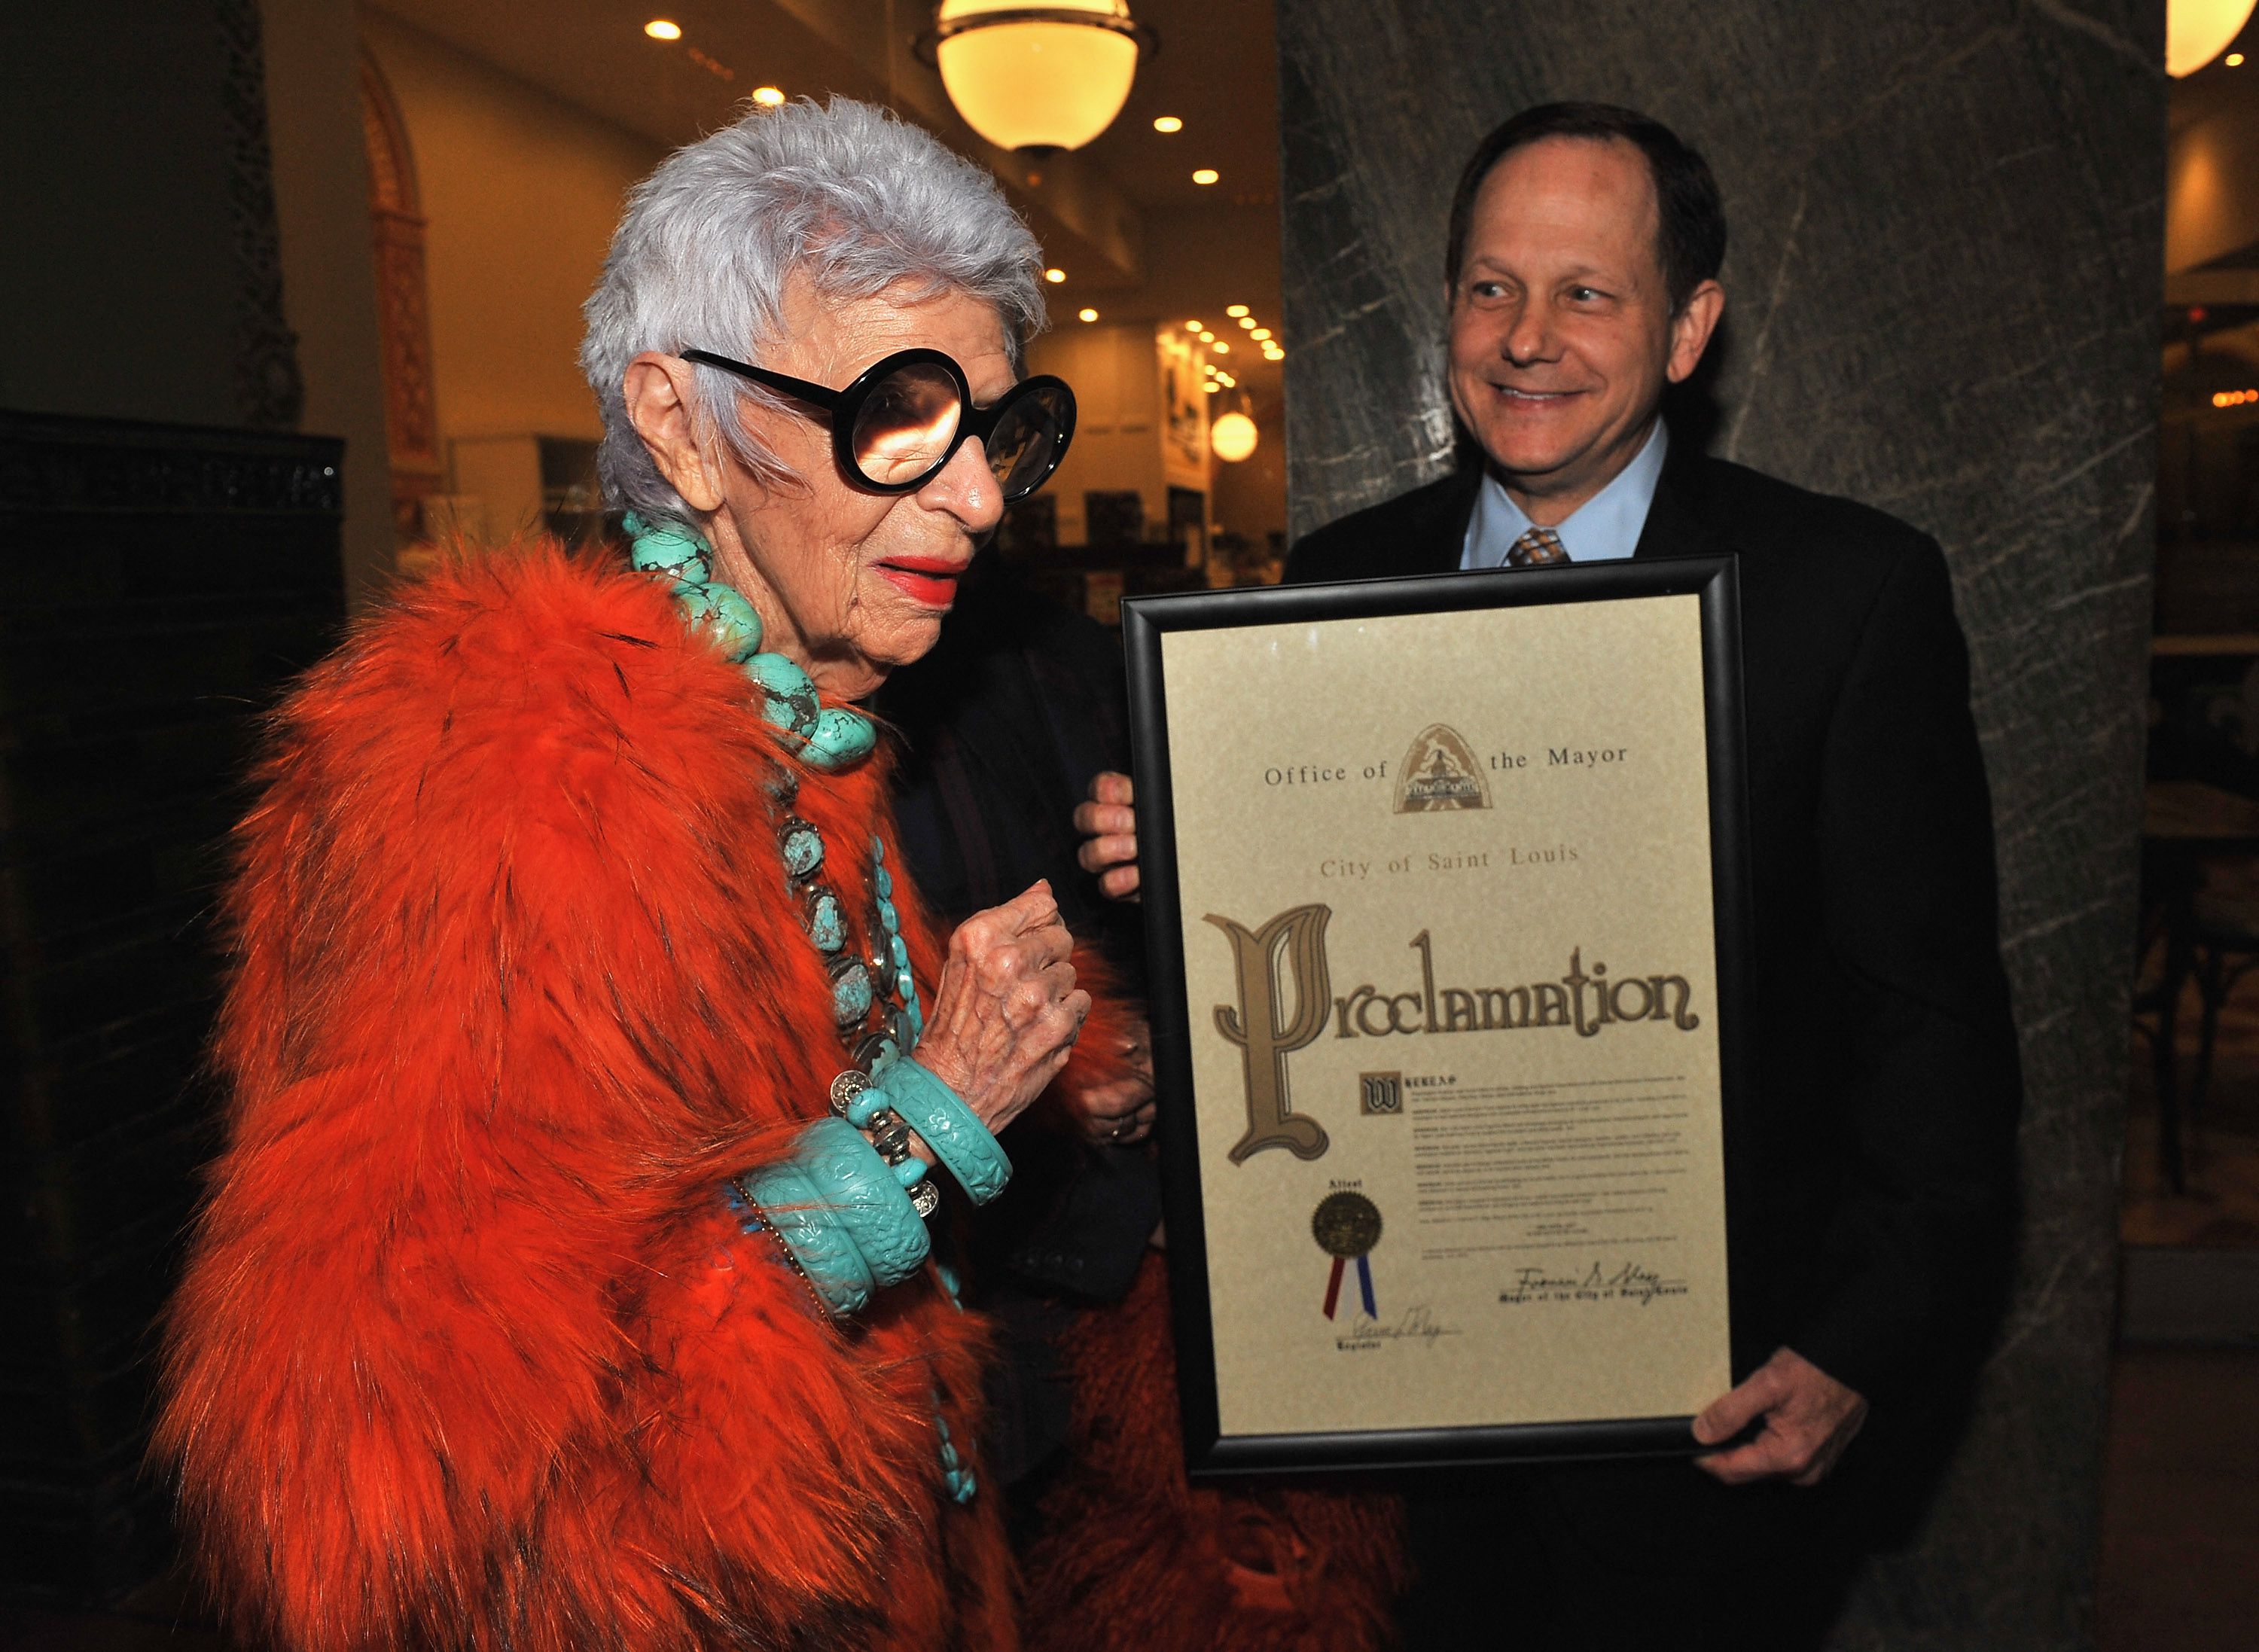 iris apfel: the 'accidental icon' who was an unforgettable fashionable centenarian